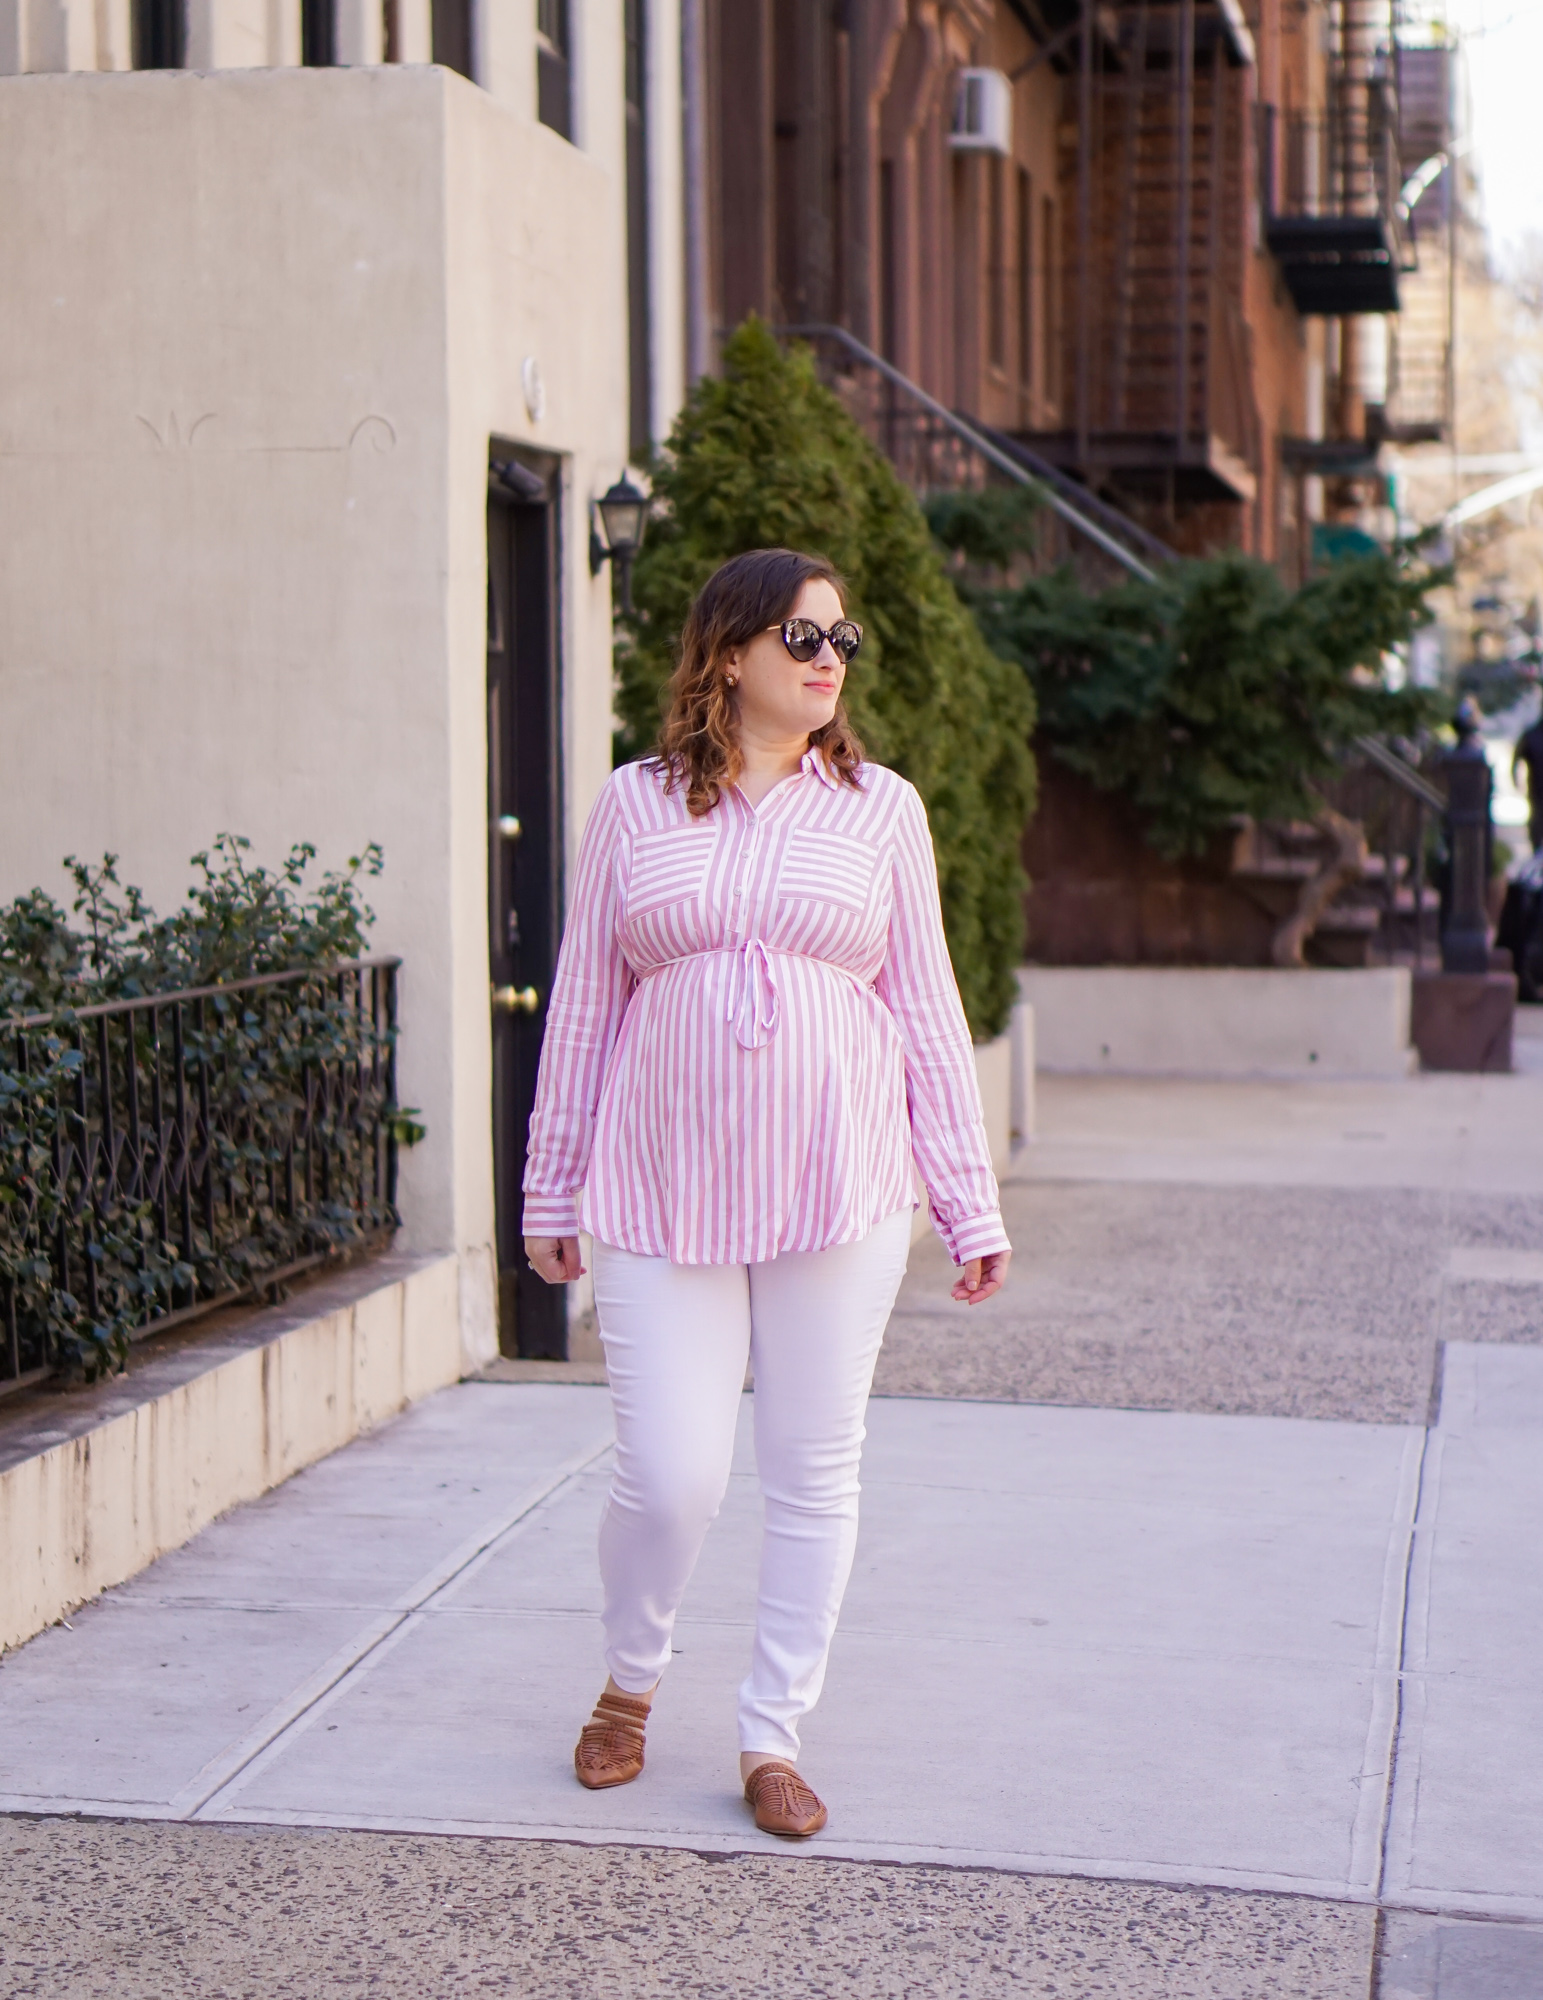 Springy striped shirt and white jeans